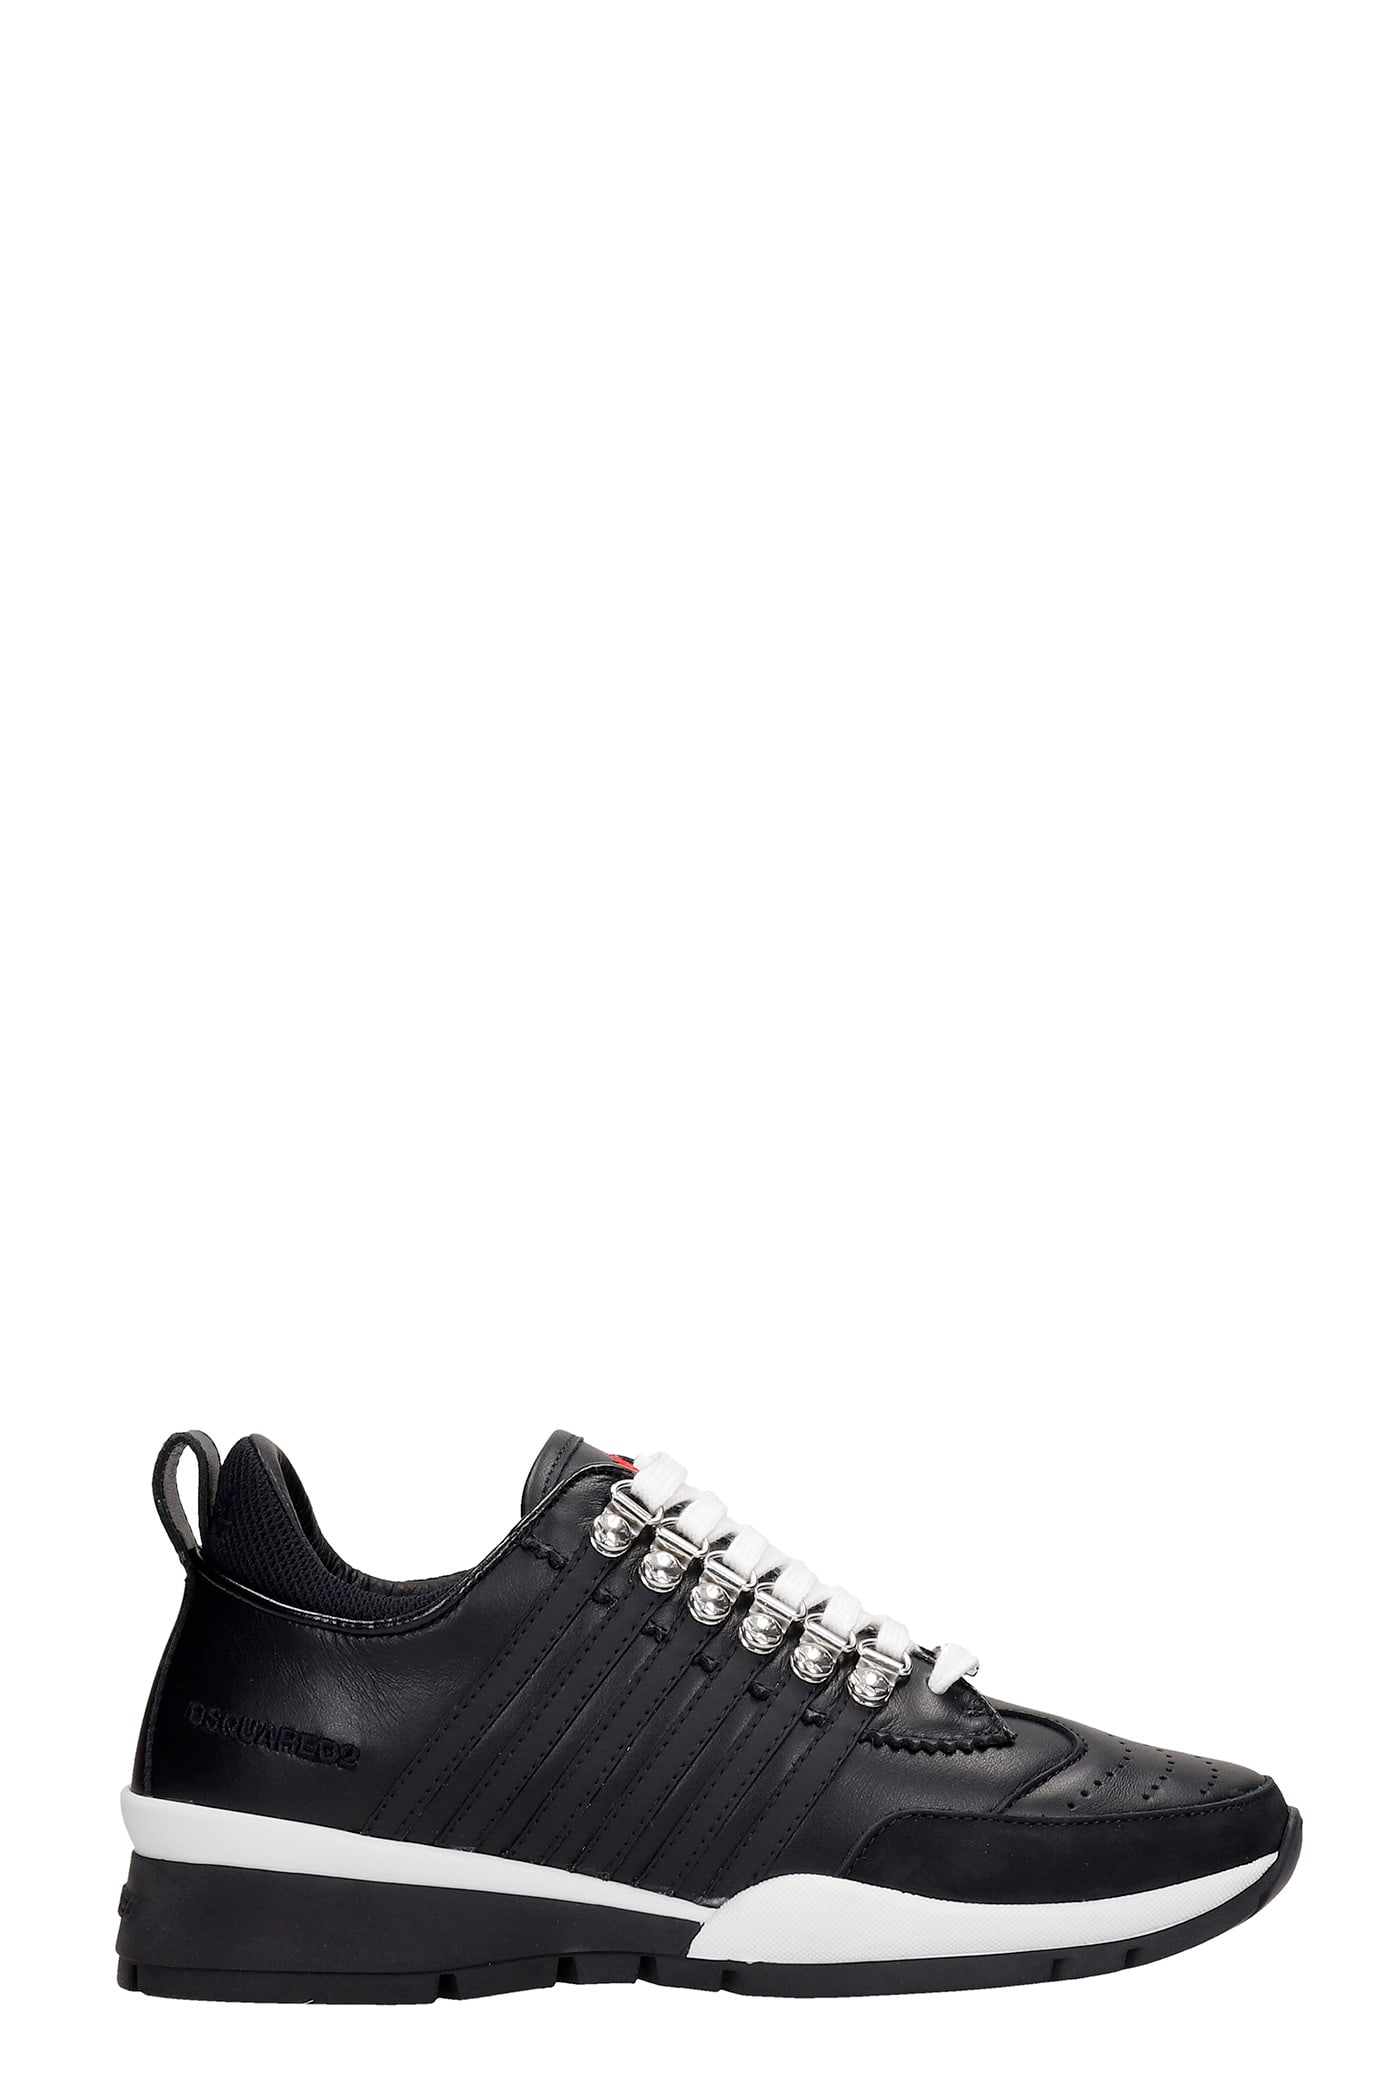 Dsquared2 Sneakers In Black Leather